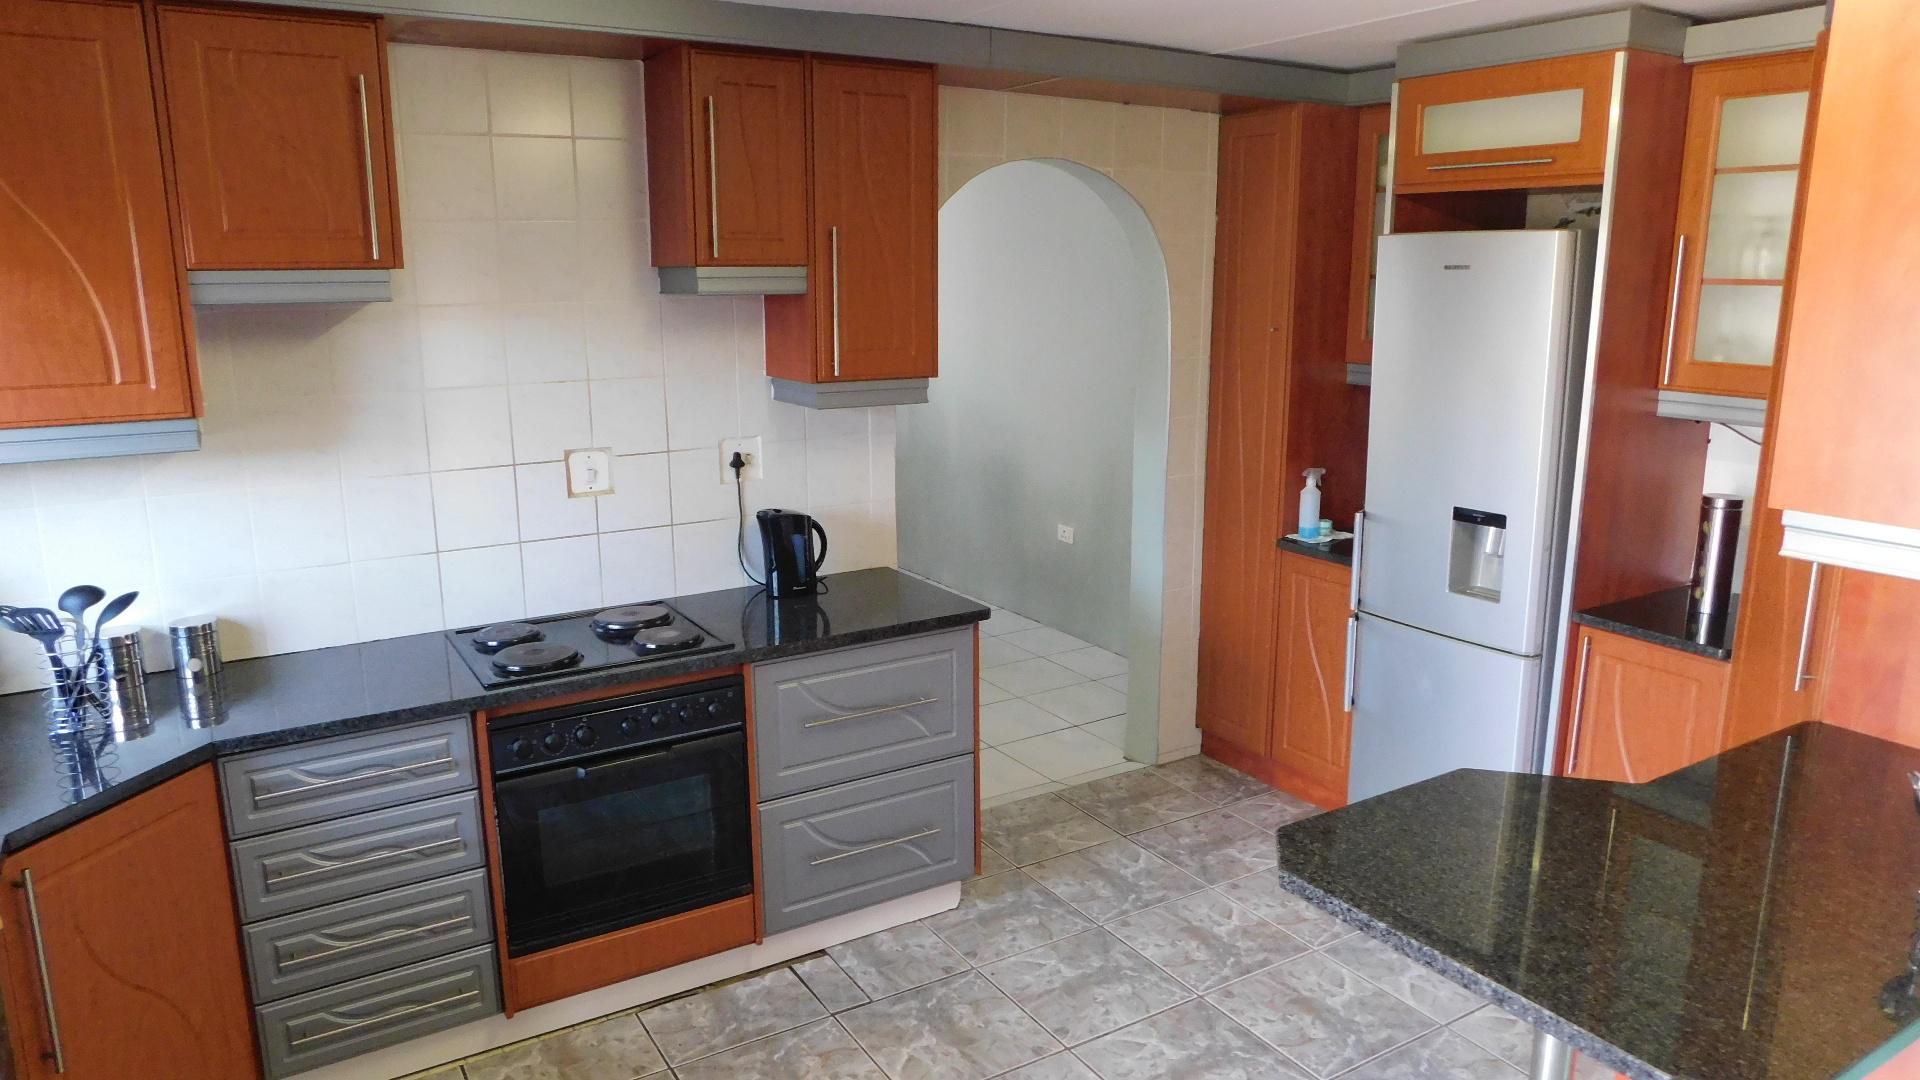 Kitchen - 19 square meters of property in Hayfields